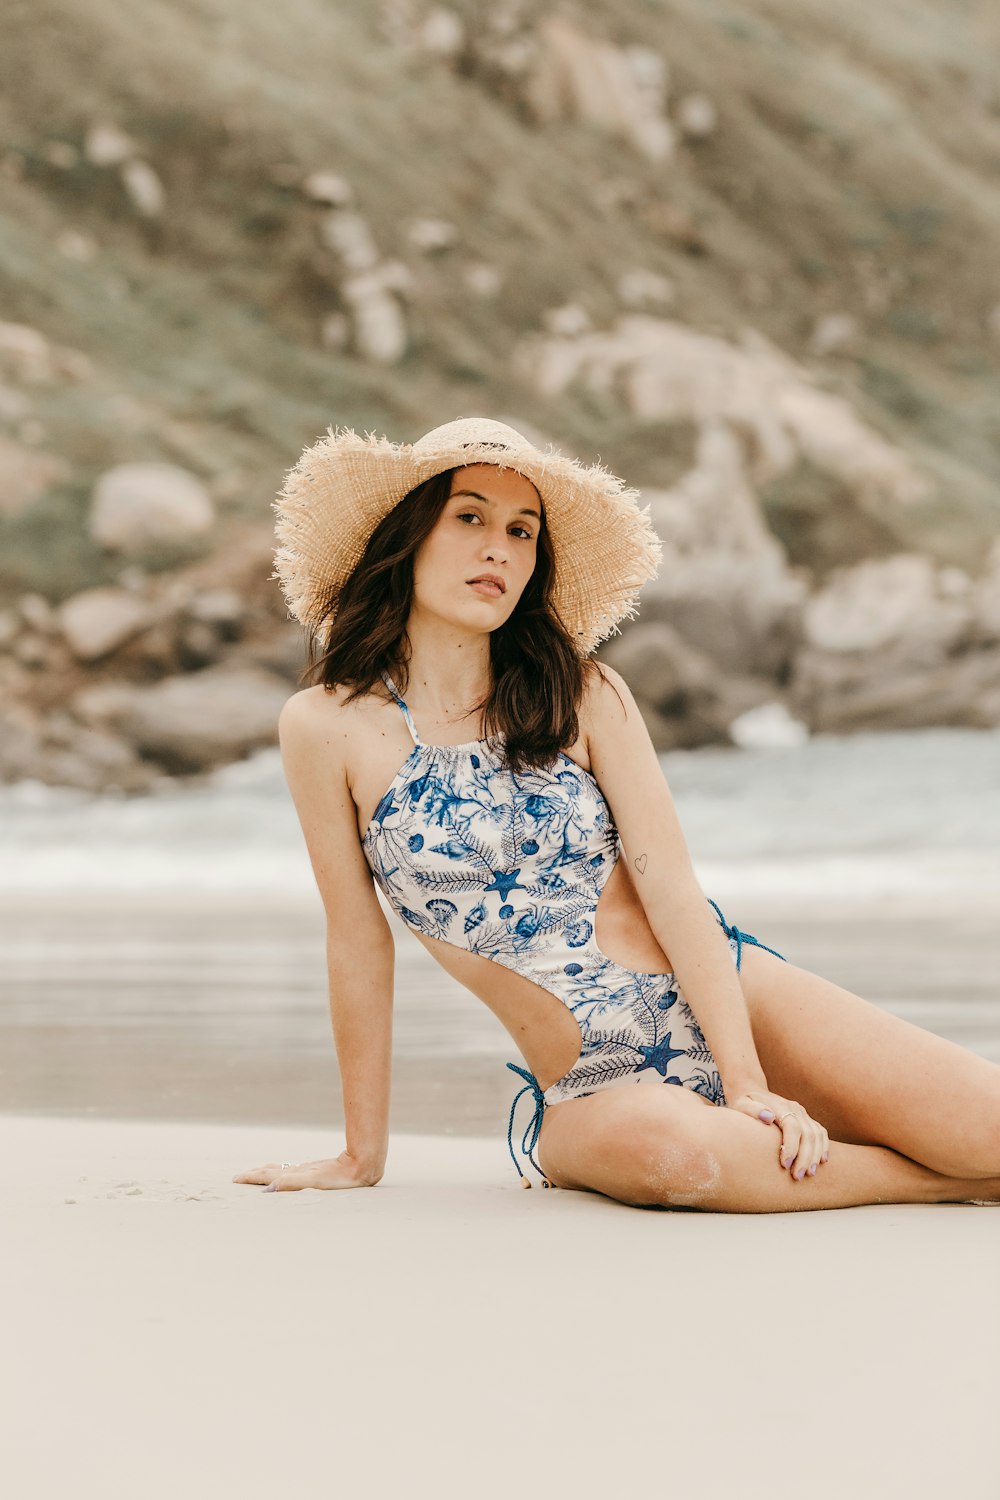 woman in blue and white floral bikini wearing brown sun hat sitting on beach shore during